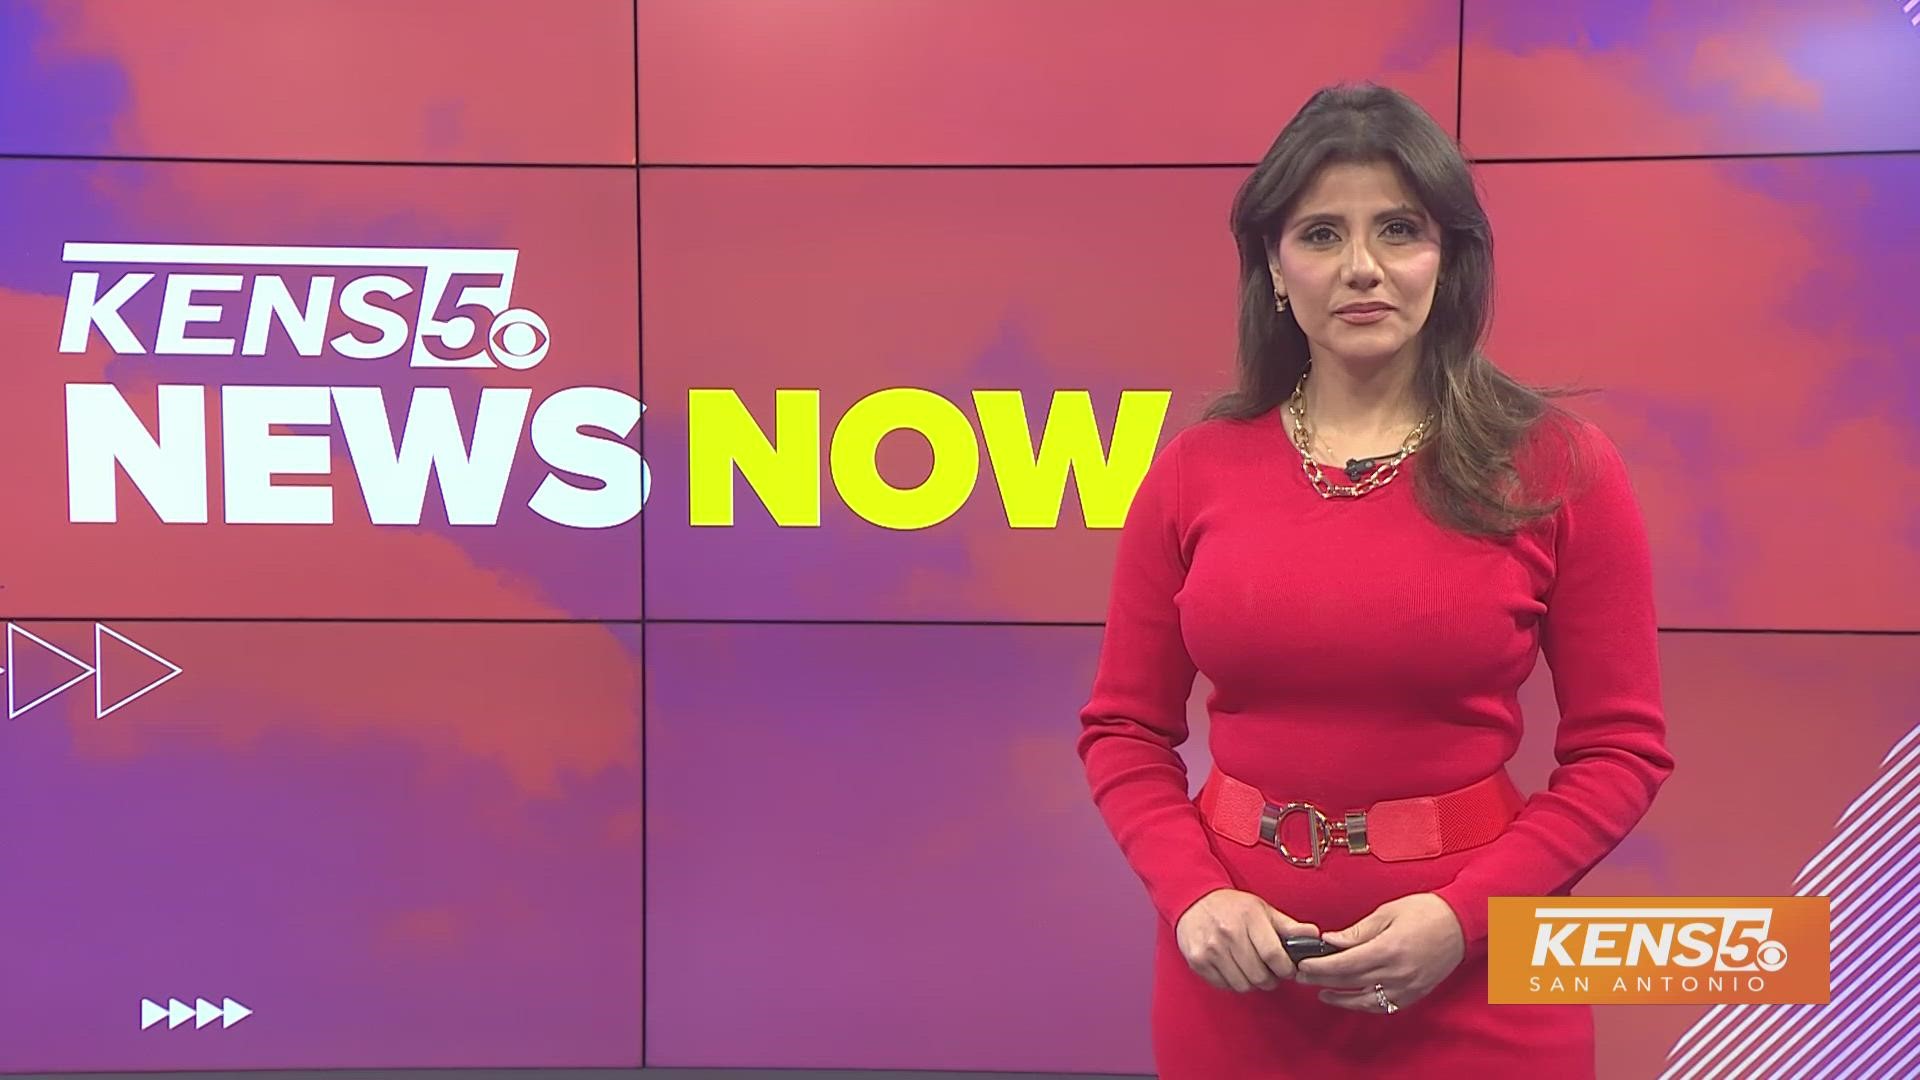 Follow us here to get the latest top headlines with KENS 5 anchor Sarah Forgany every weekday.